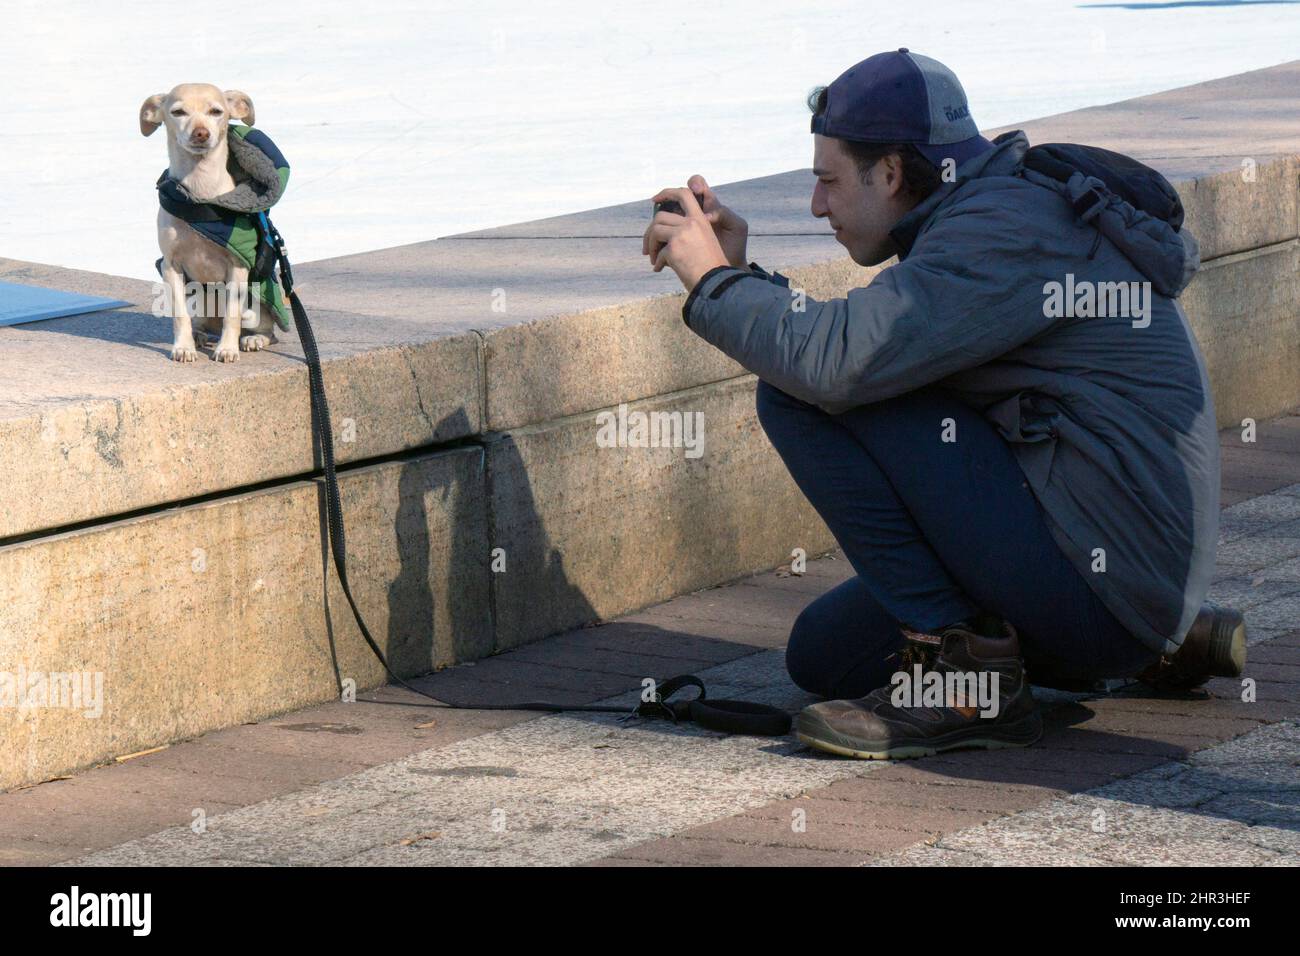 A YOUNG MAN TAKES A PHOTO OF HIS PET DOG IN ITS WINTER COAT IN A PARK IN QUEENS, NEW YORK. Stock Photo